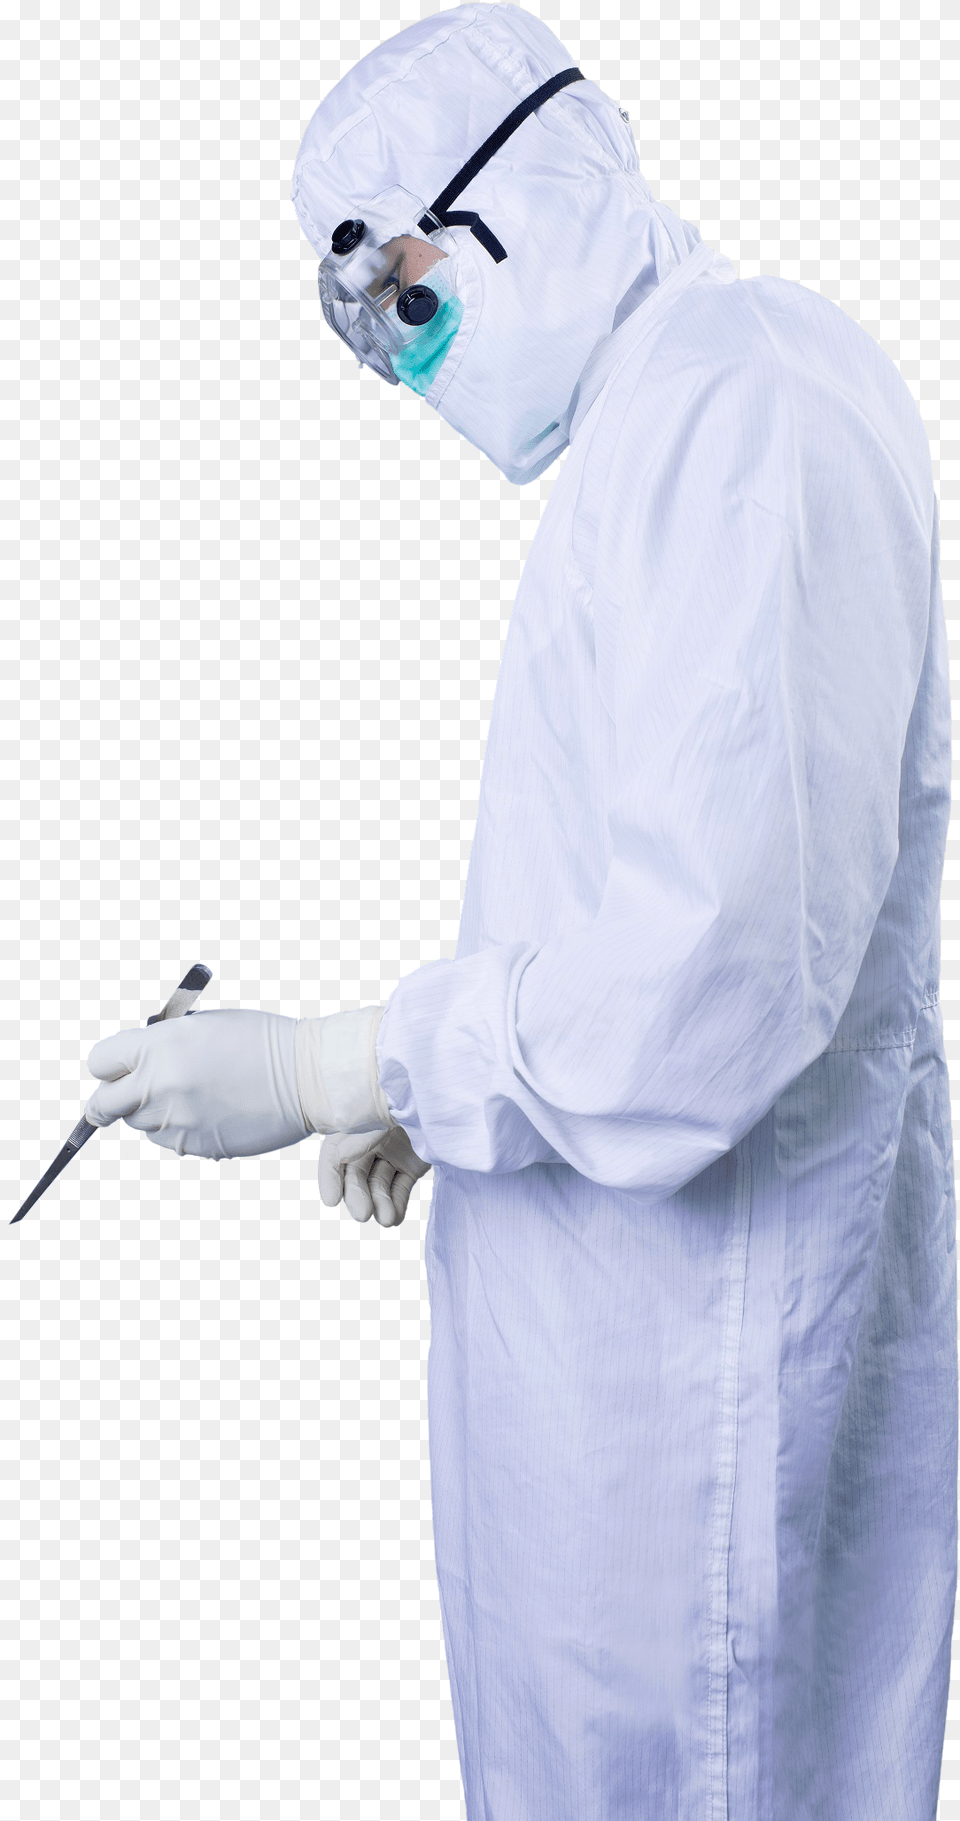 Clean Room Worker, Clothing, Coat, Glove, Lab Coat Png